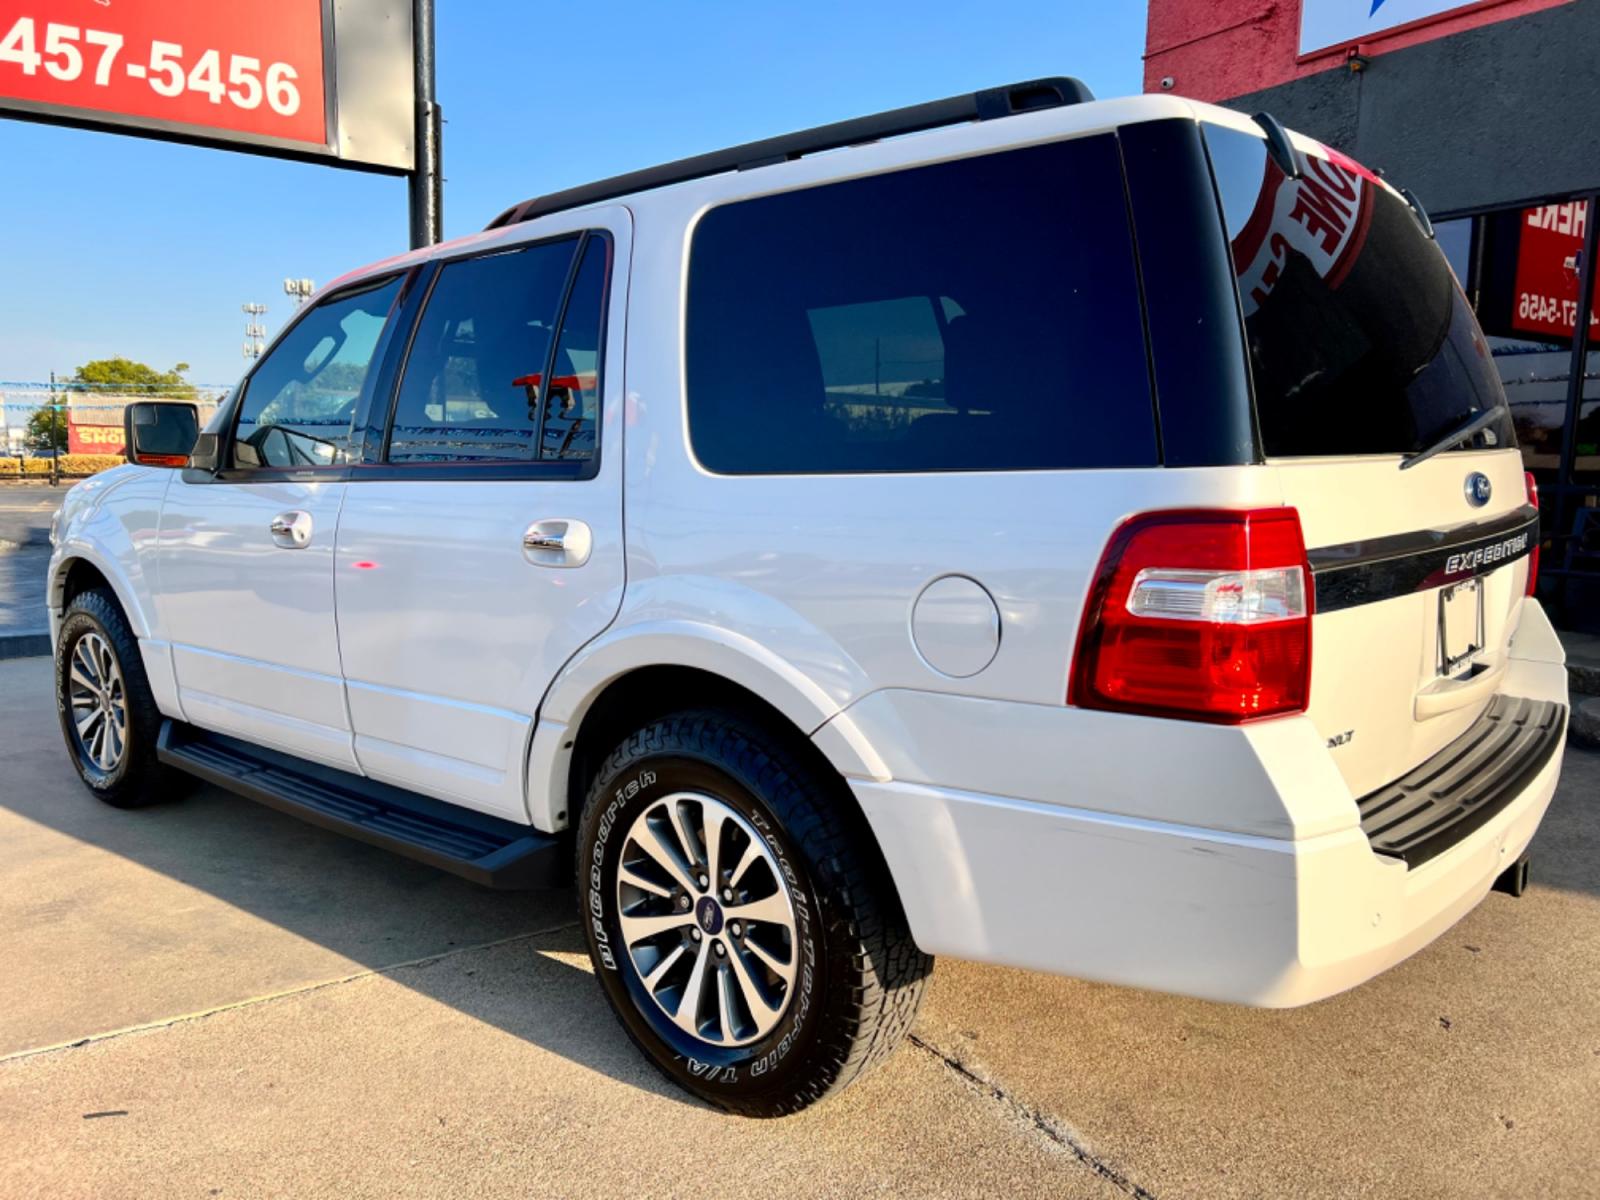 2016 WHITE FORD EXPEDITION (1FMJU1HT0GE) , located at 5900 E. Lancaster Ave., Fort Worth, TX, 76112, (817) 457-5456, 0.000000, 0.000000 - This is a 2016 FORD EXPEDITION 4 DOOR SUV that is in excellent condition. There are no dents or scratches. The interior is clean with no rips or tears or stains. All power windows, door locks and seats. Ice cold AC for those hot Texas summer days. It is equipped with a CD player, AM/FM radio, AUX po - Photo #4